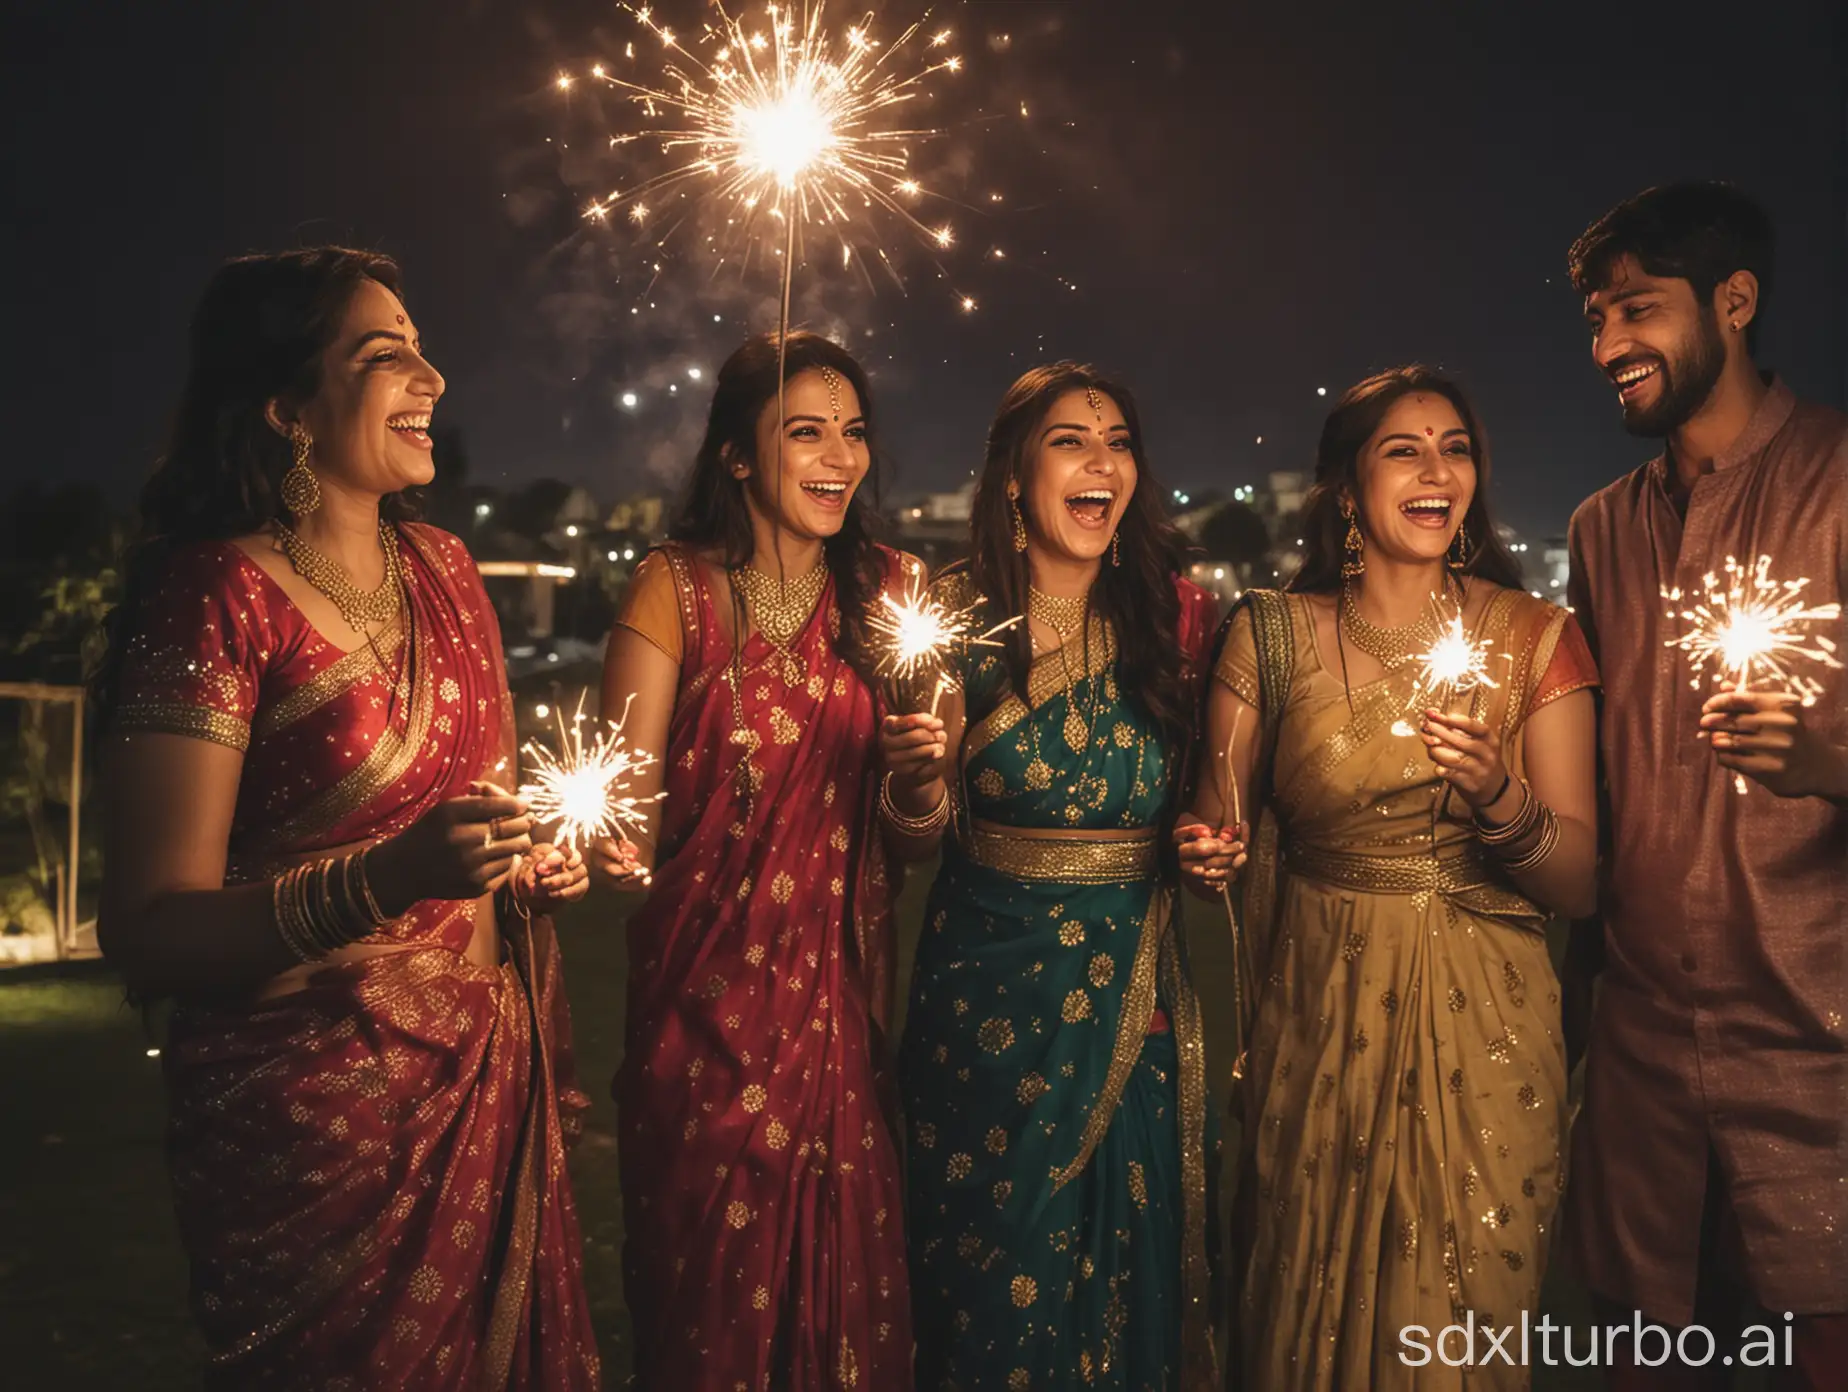 Friends-Laughing-and-Holding-Sparklers-in-Traditional-Indian-Attire-at-Diwali-Night-Celebration